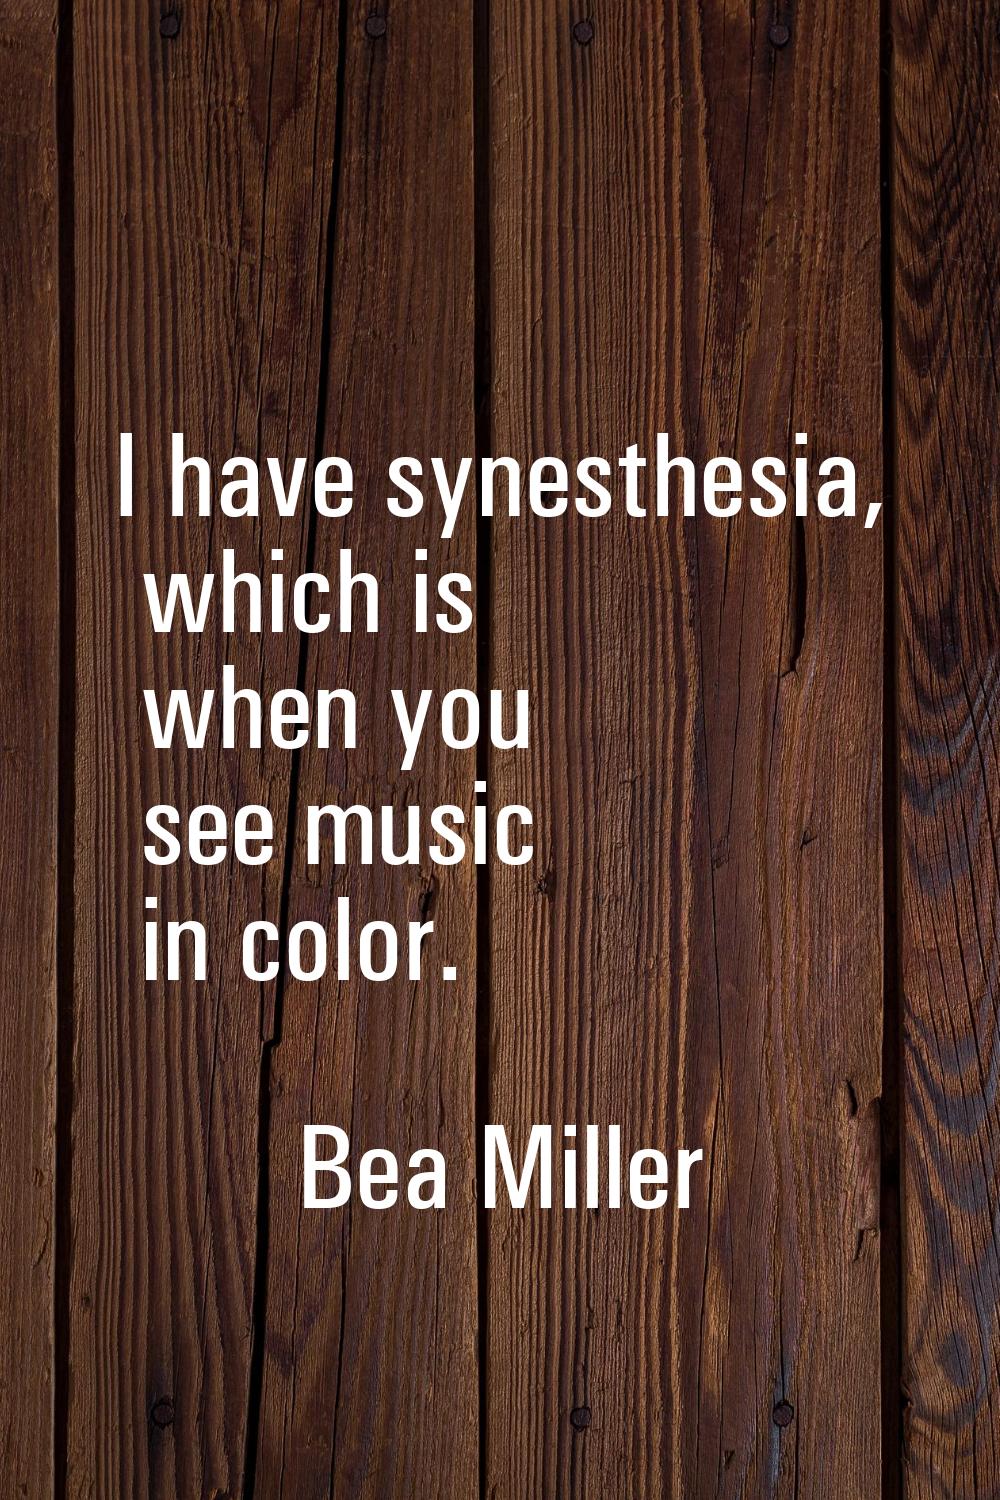 I have synesthesia, which is when you see music in color.